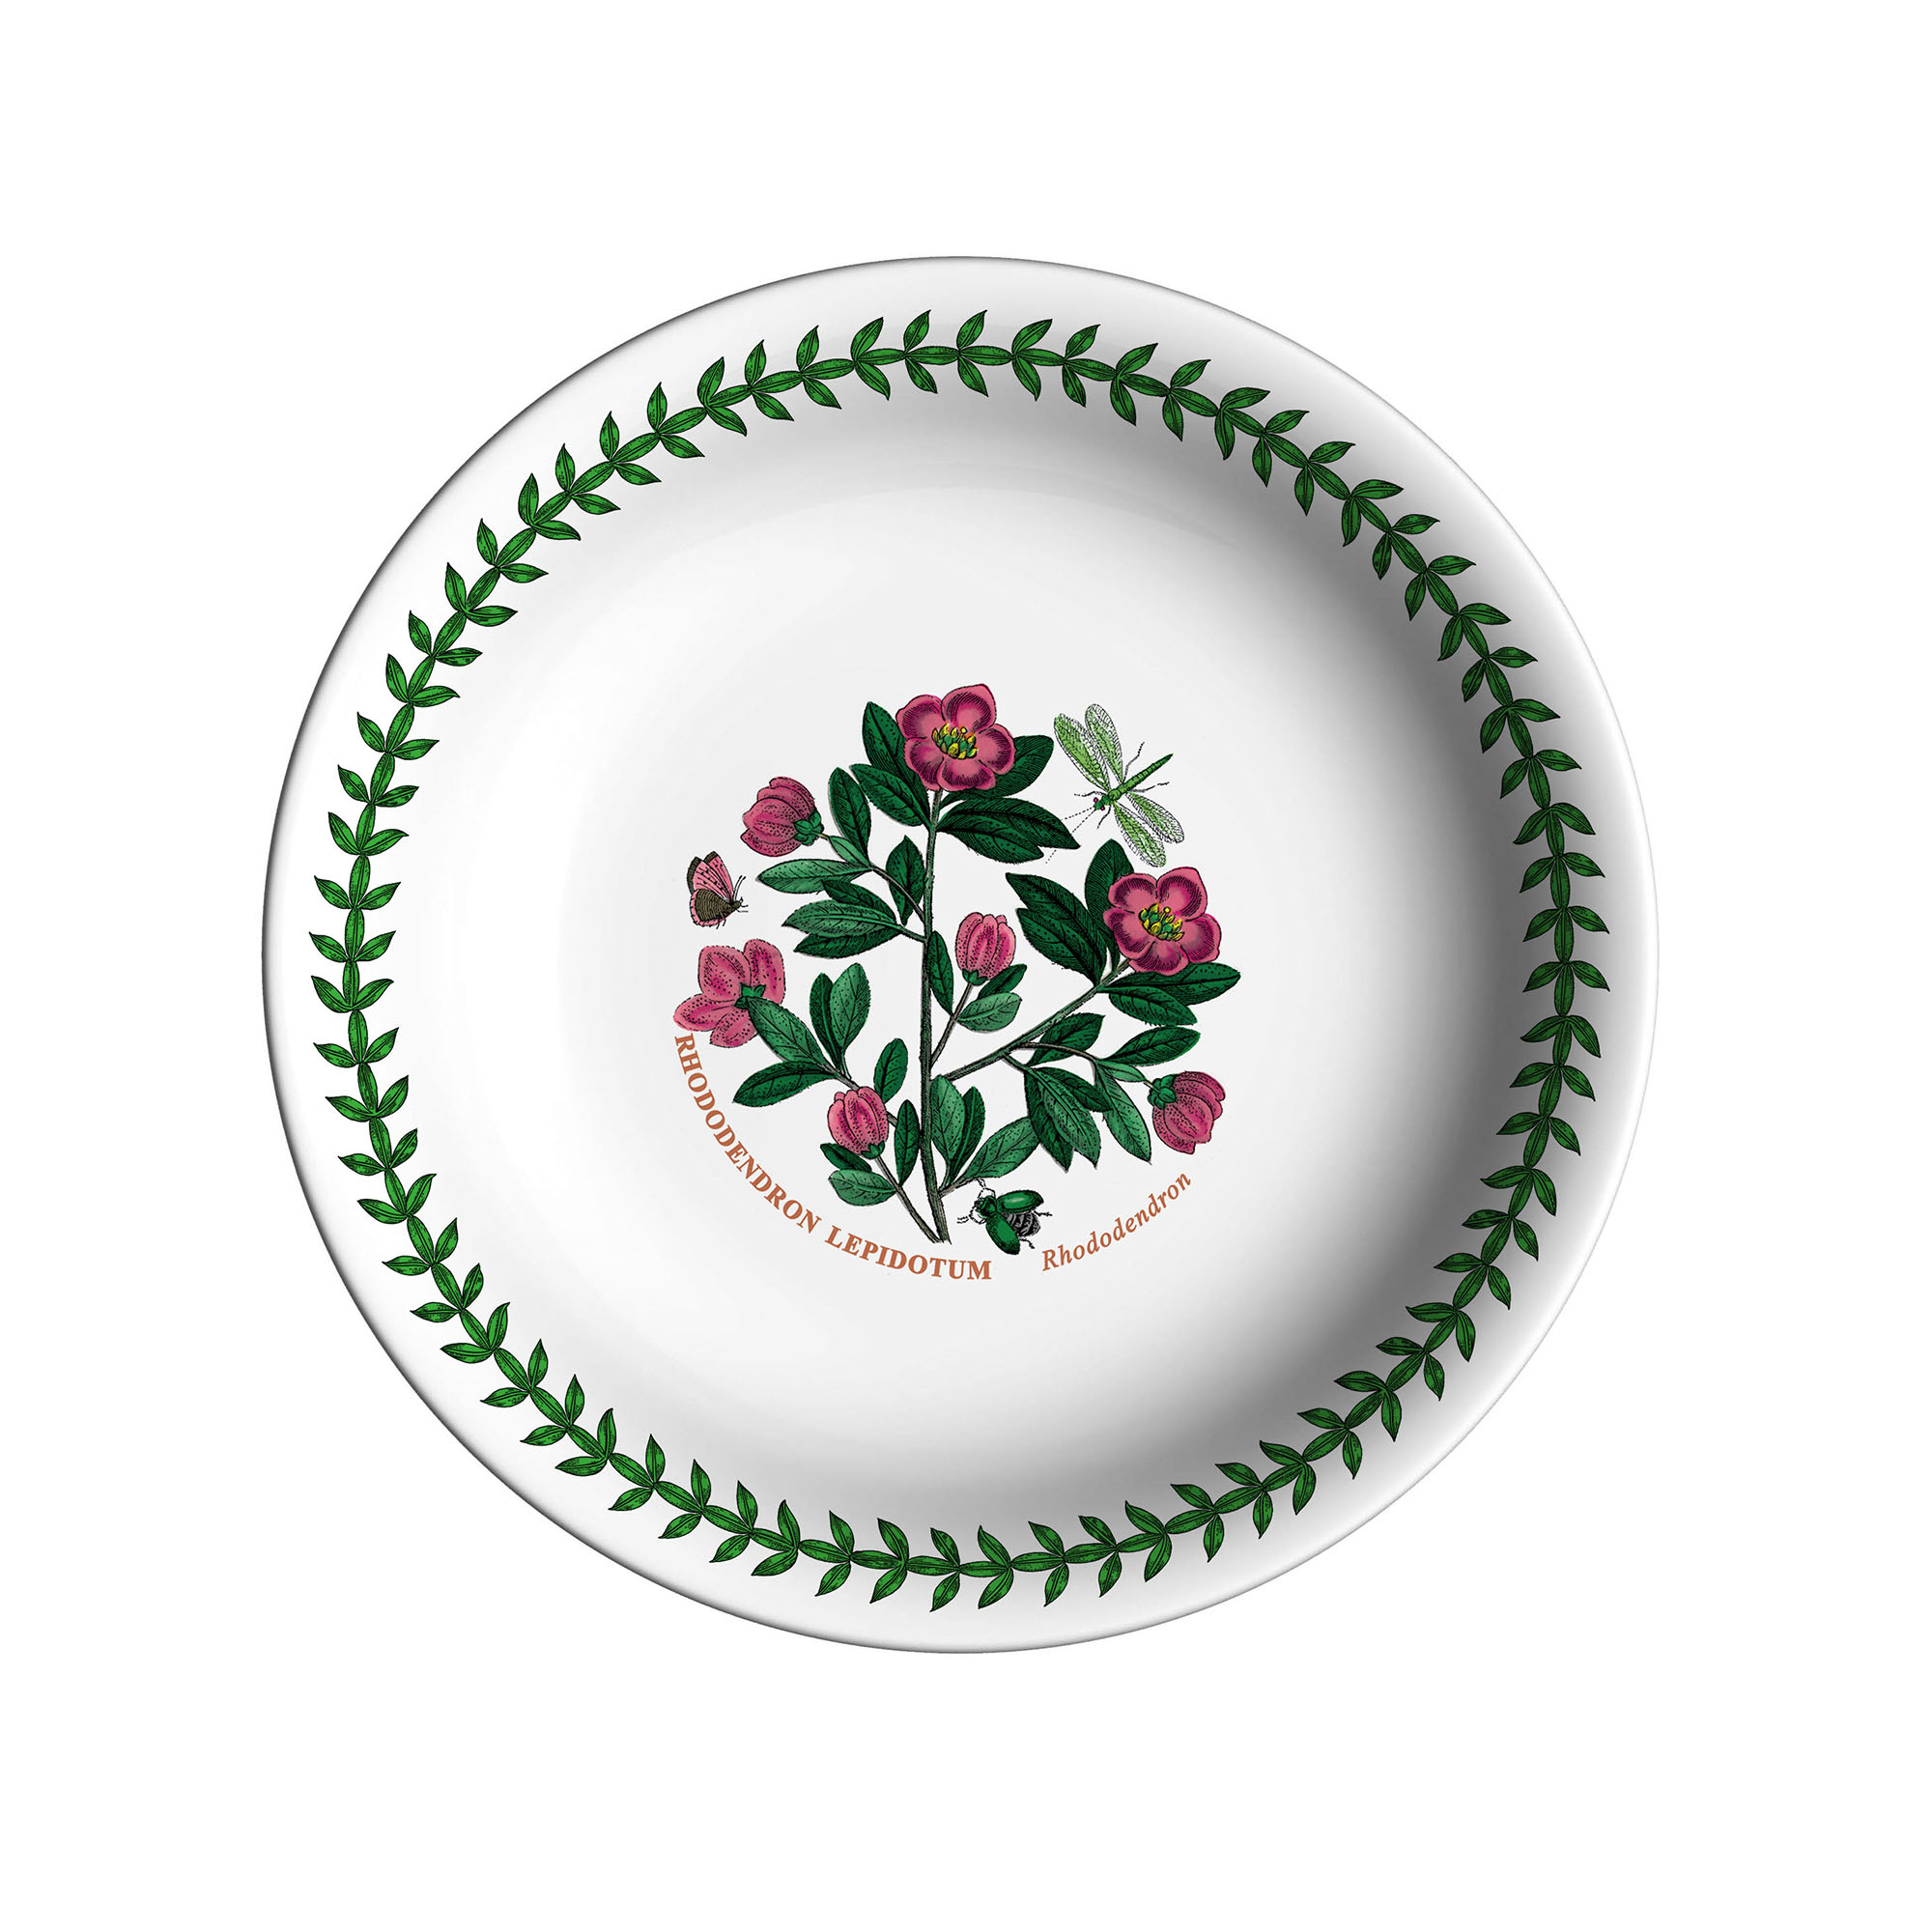 Botanic Garden Seconds 7 Inch Bowl, No Guarantee of Floral Motif image number null